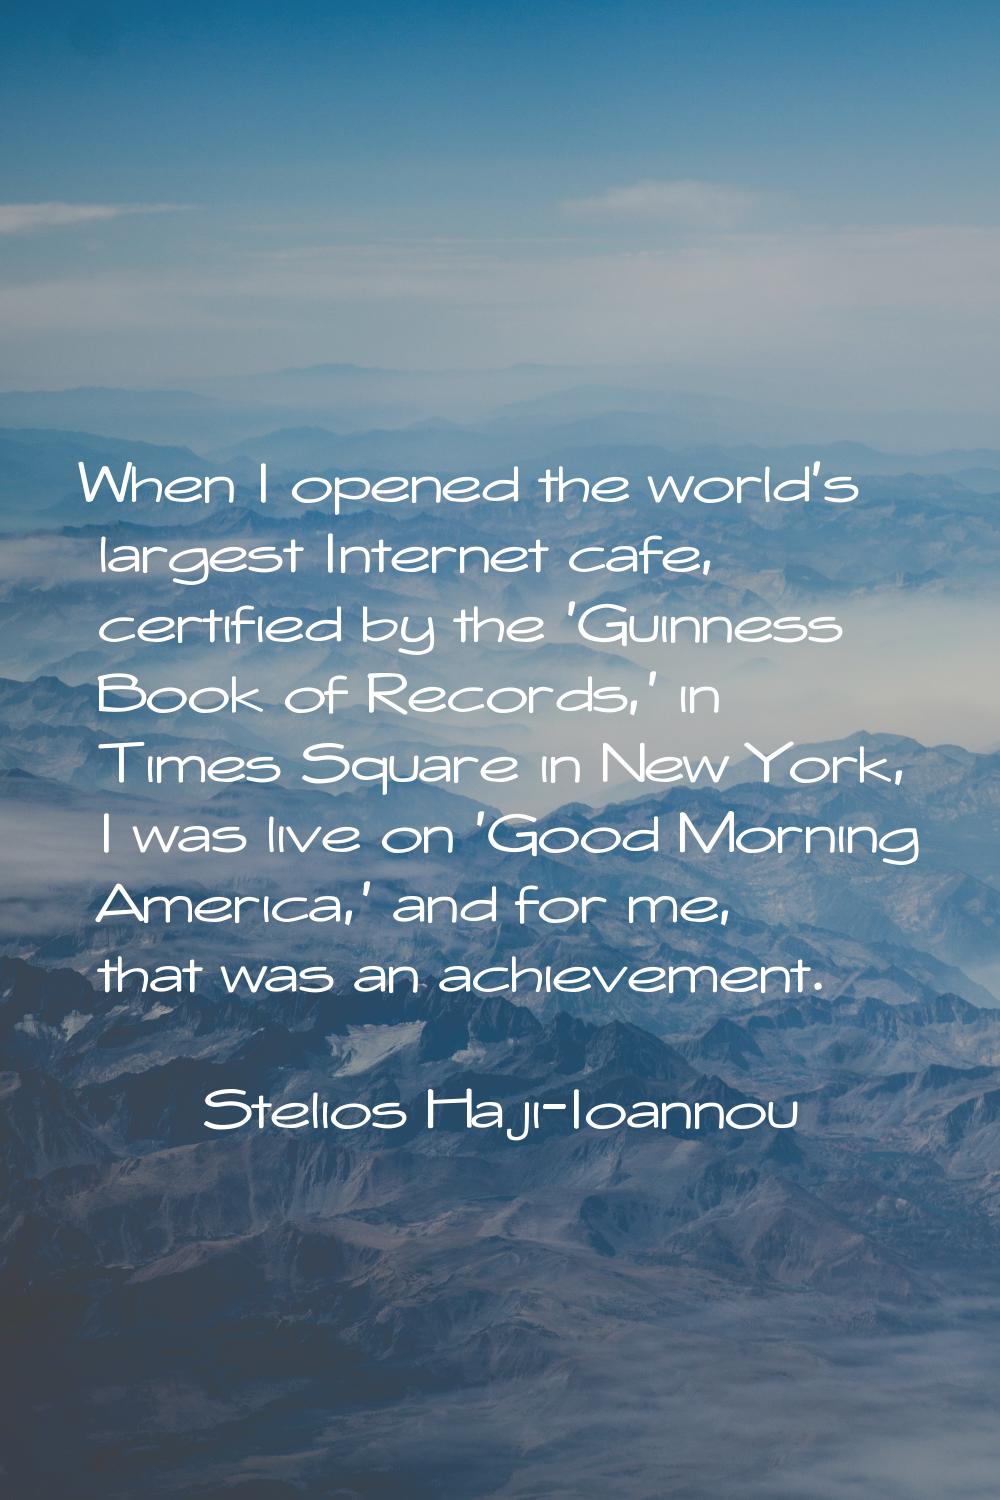 When I opened the world's largest Internet cafe, certified by the 'Guinness Book of Records,' in Ti